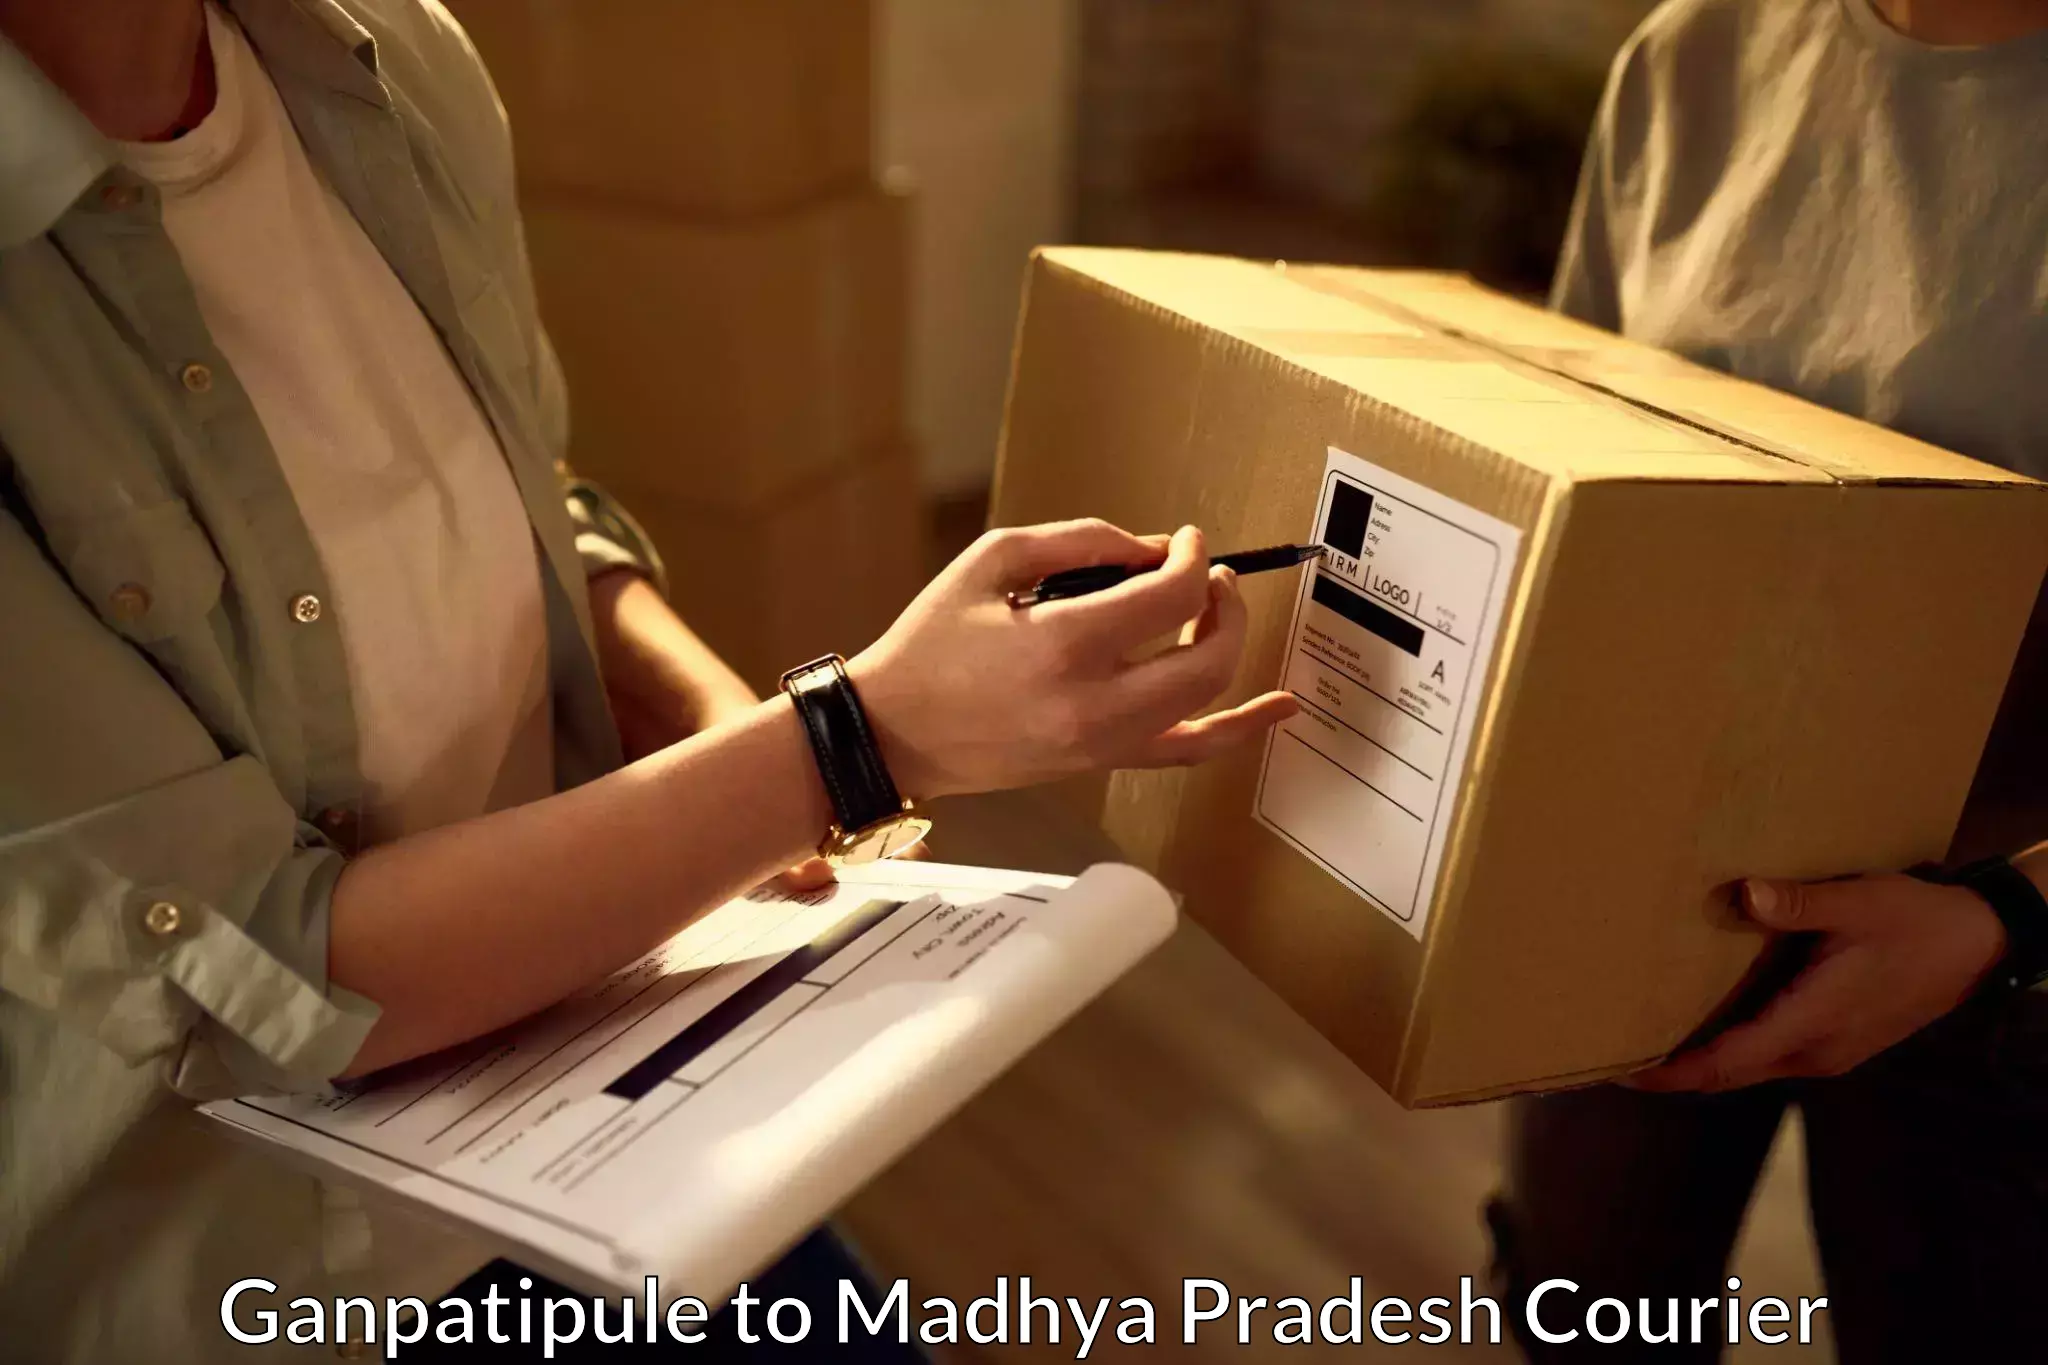 Easy access courier services Ganpatipule to Mandla